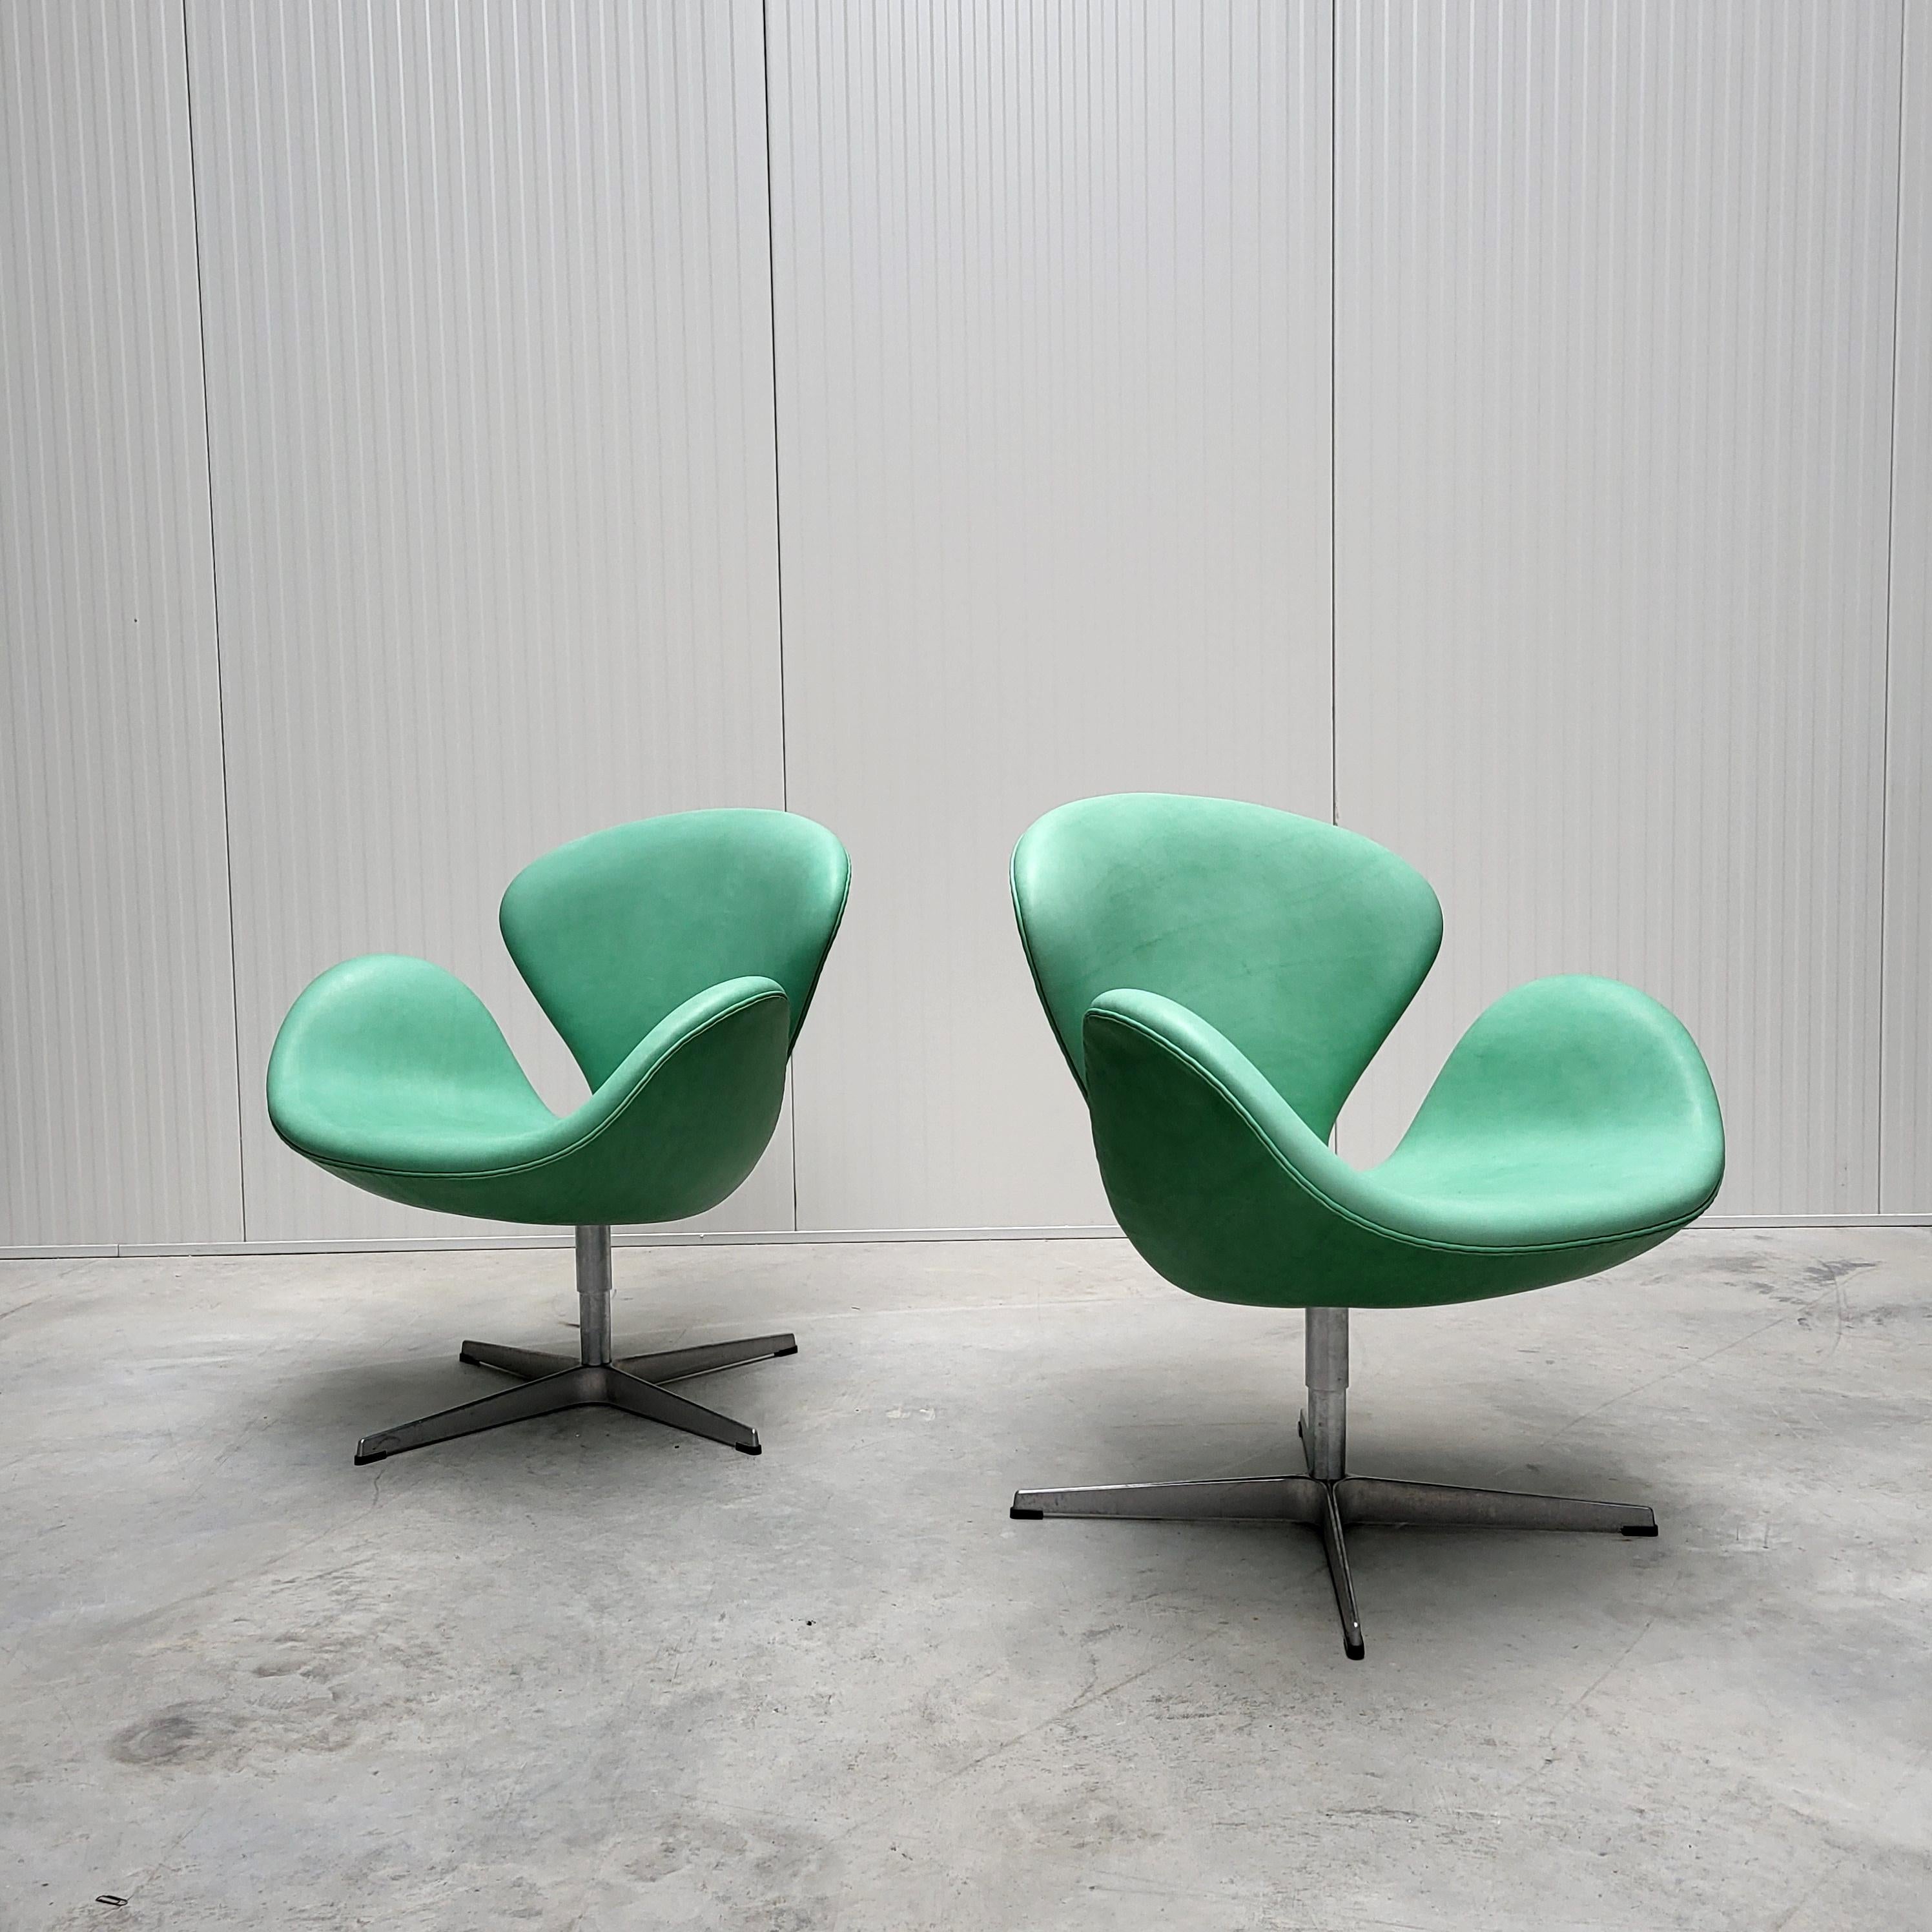 Mid-20th Century Mint Green Swan Sofa & 2x Chair by Arne Jacobsen for Fritz Hansen For Sale